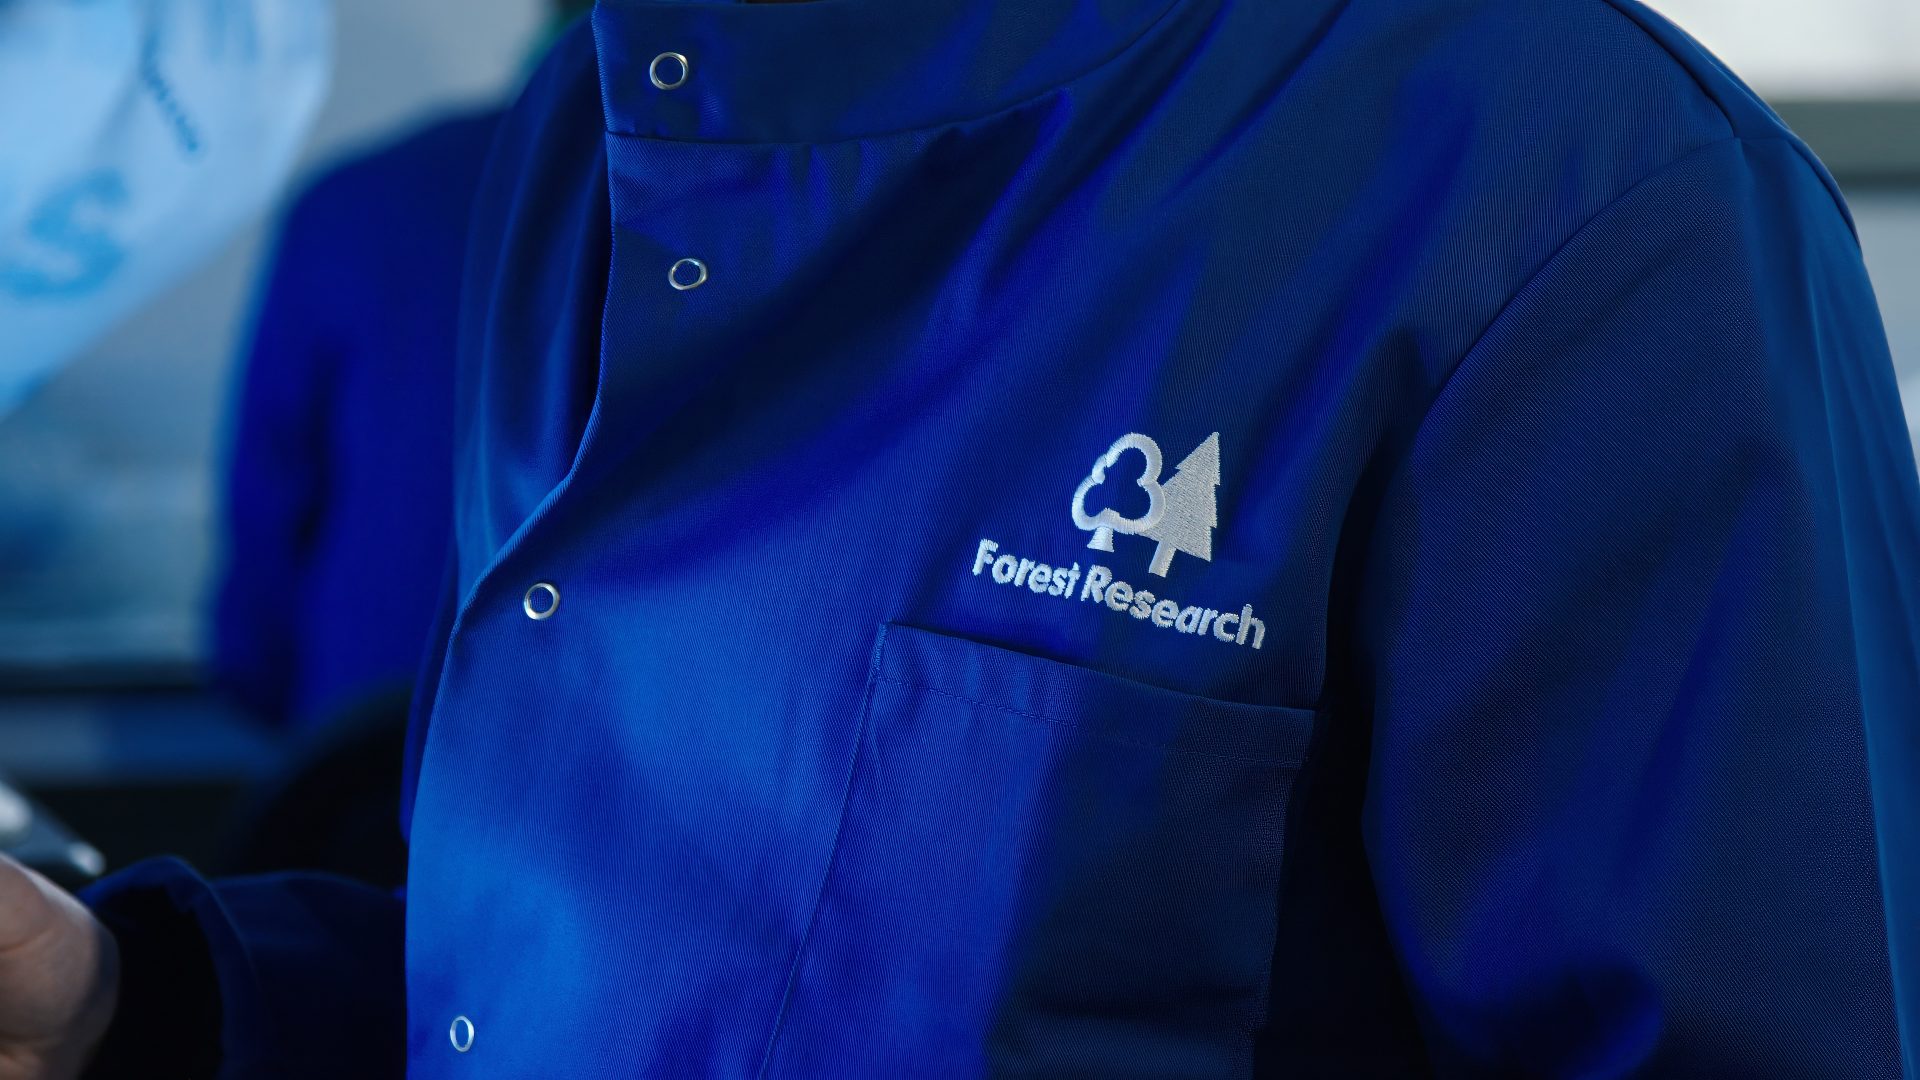 A Forest Research scientist wears a blue lab coat with the organisation logo visible.